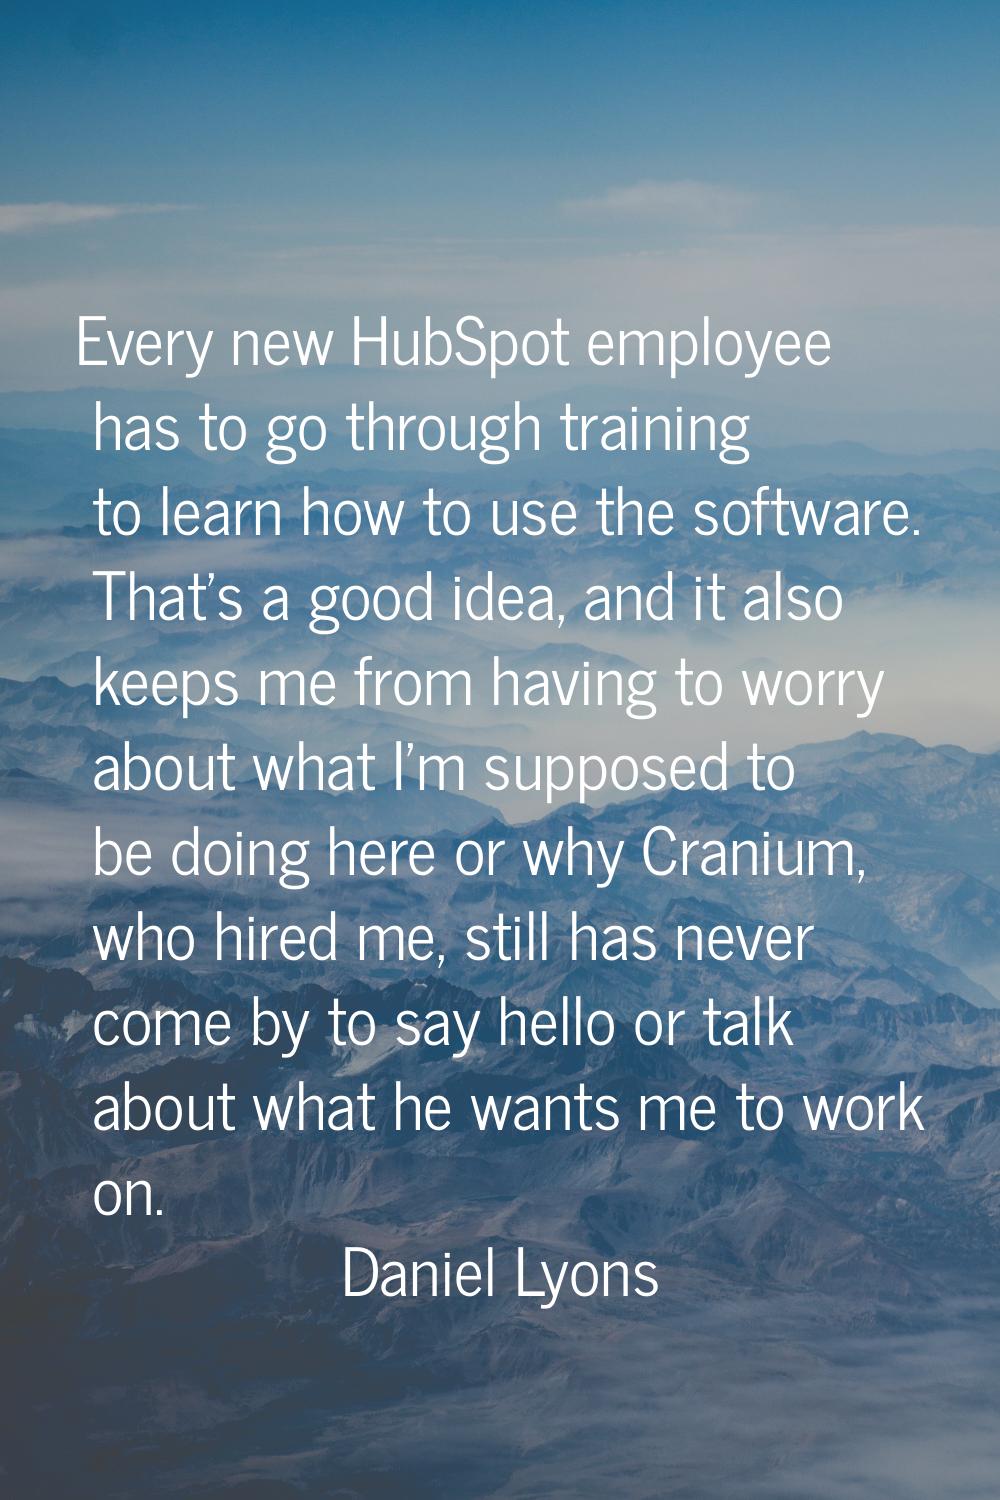 Every new HubSpot employee has to go through training to learn how to use the software. That's a go